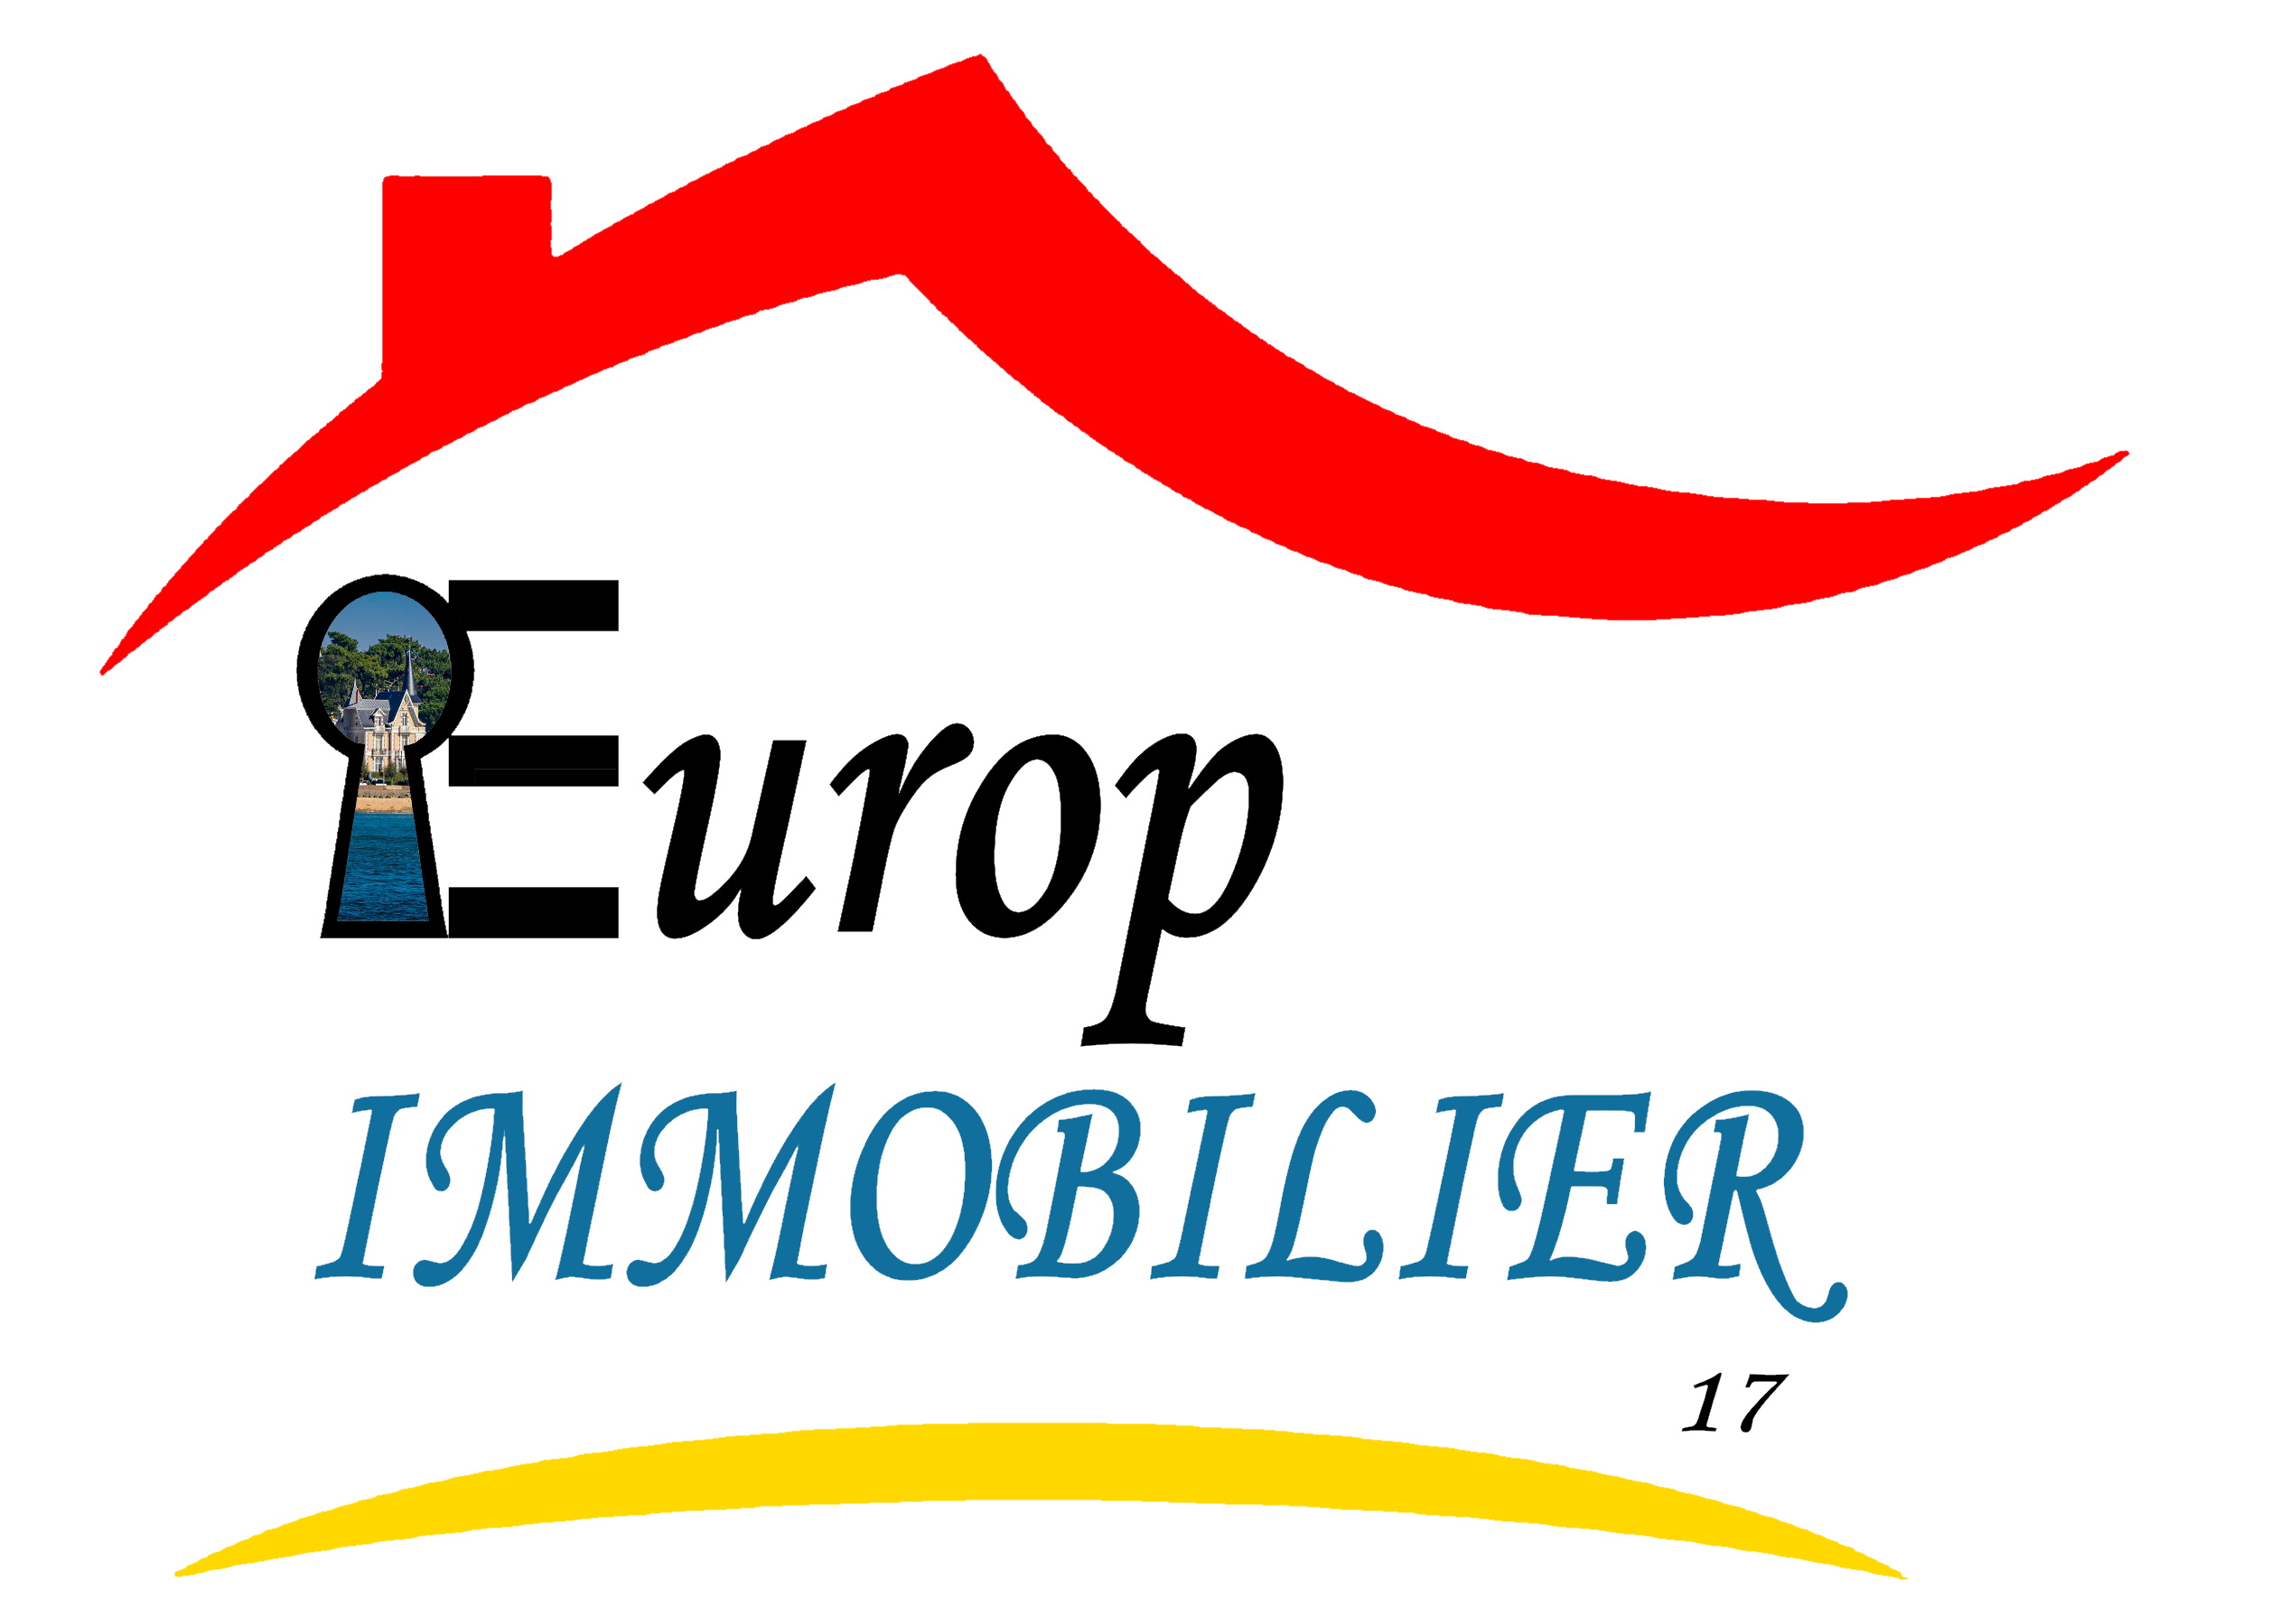 Agence Europ Immobilier 17